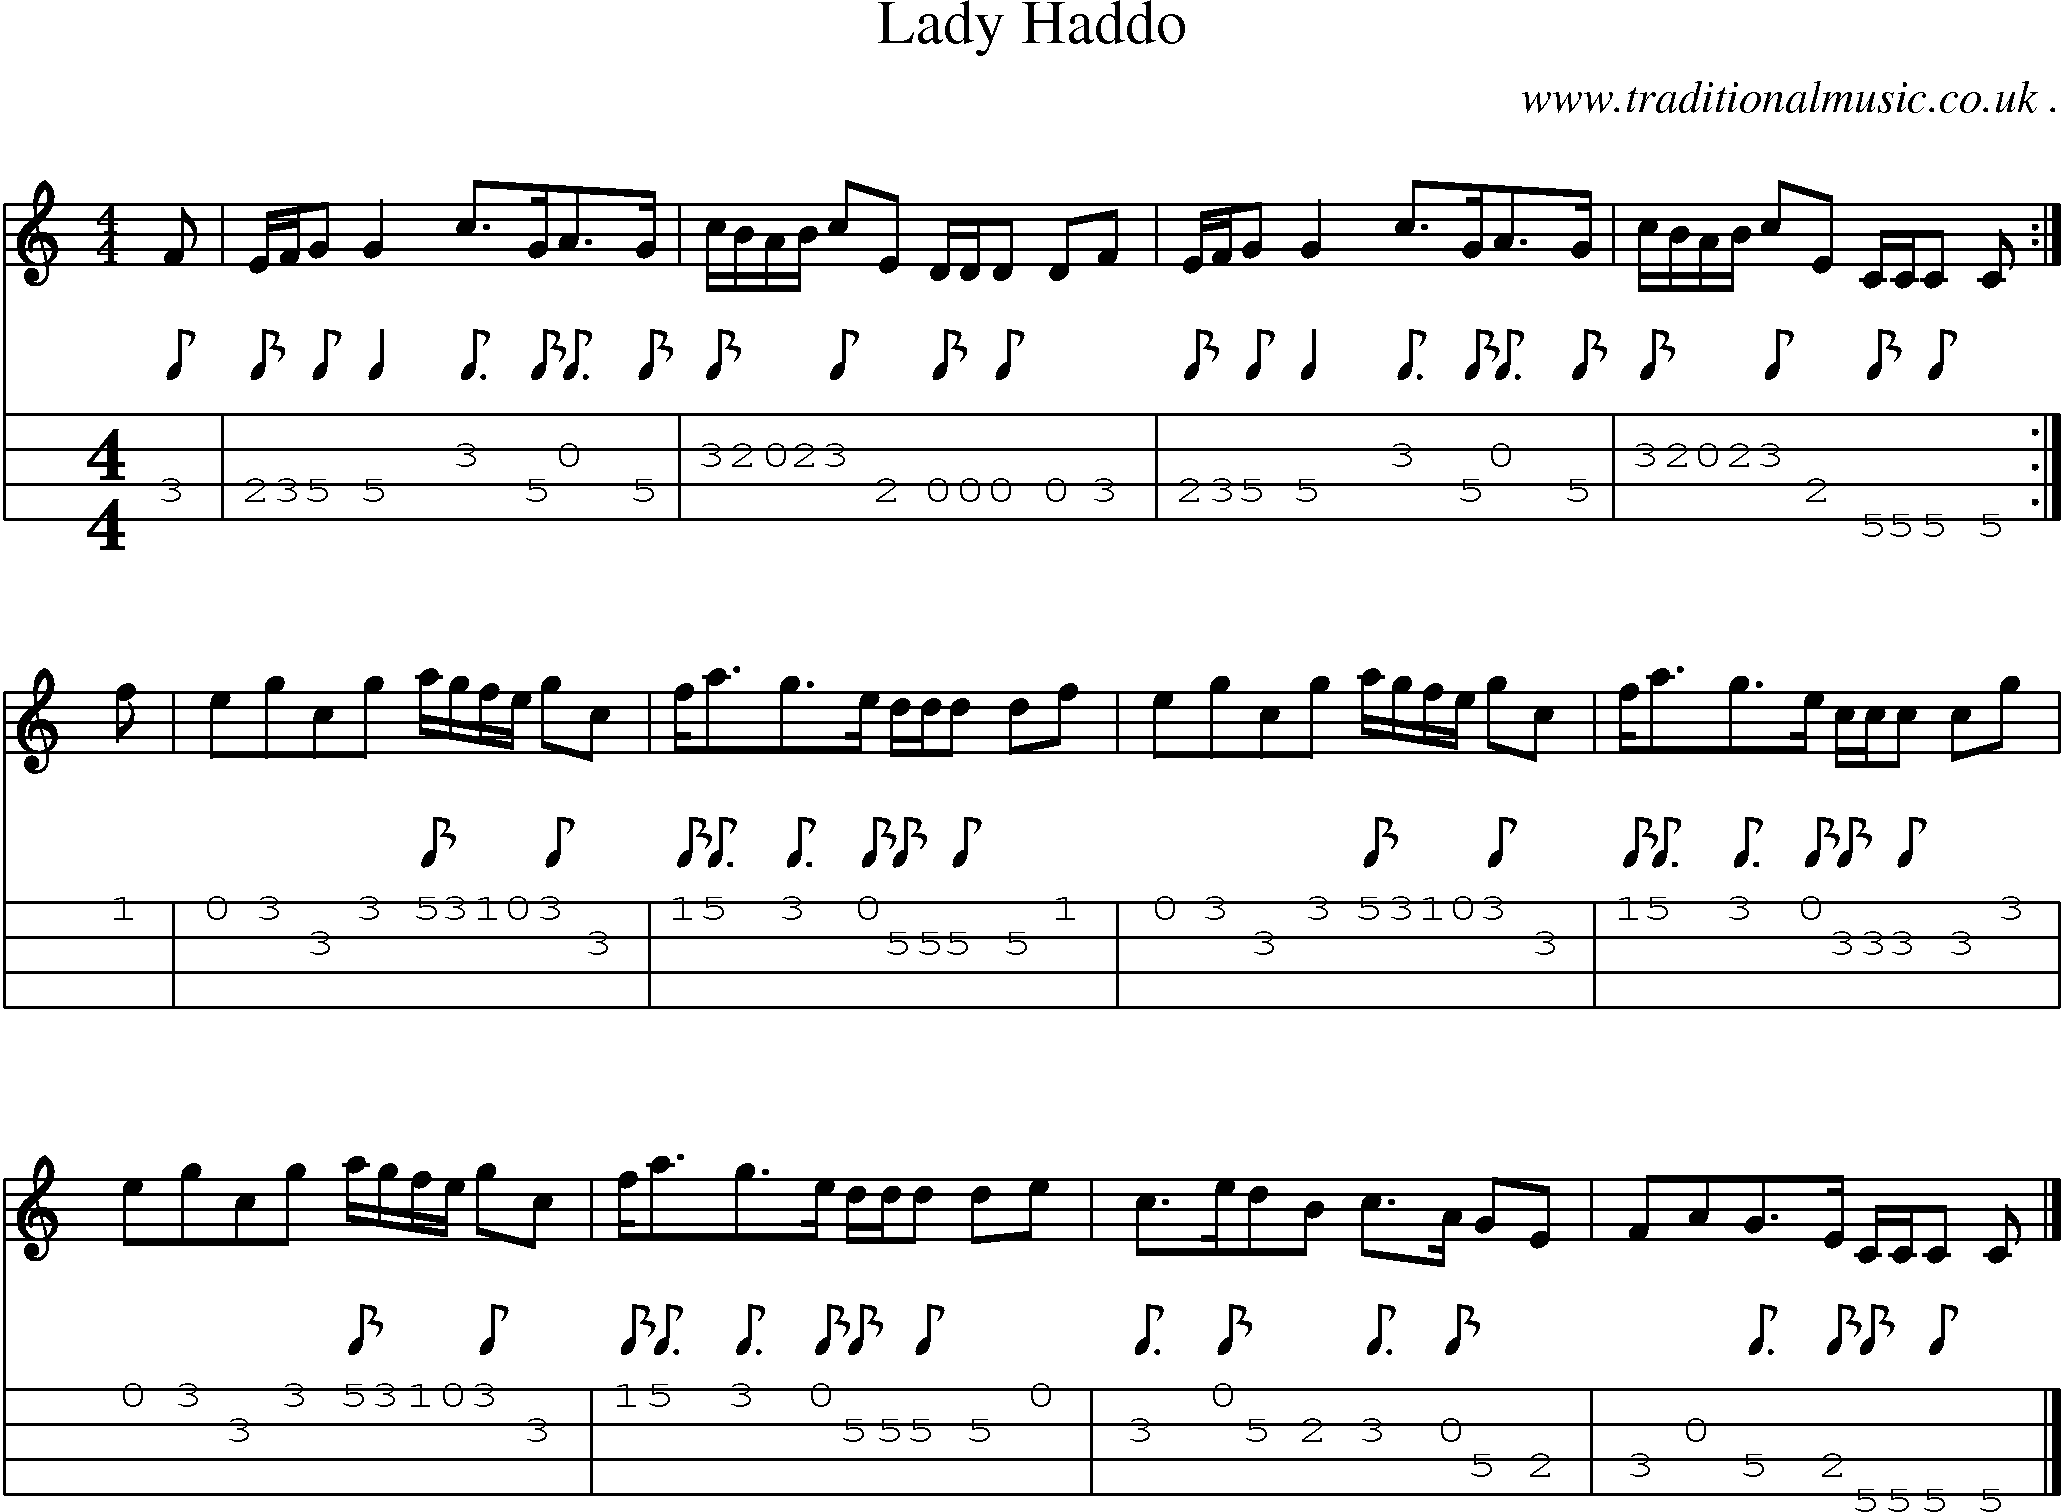 Sheet-music  score, Chords and Mandolin Tabs for Lady Haddo